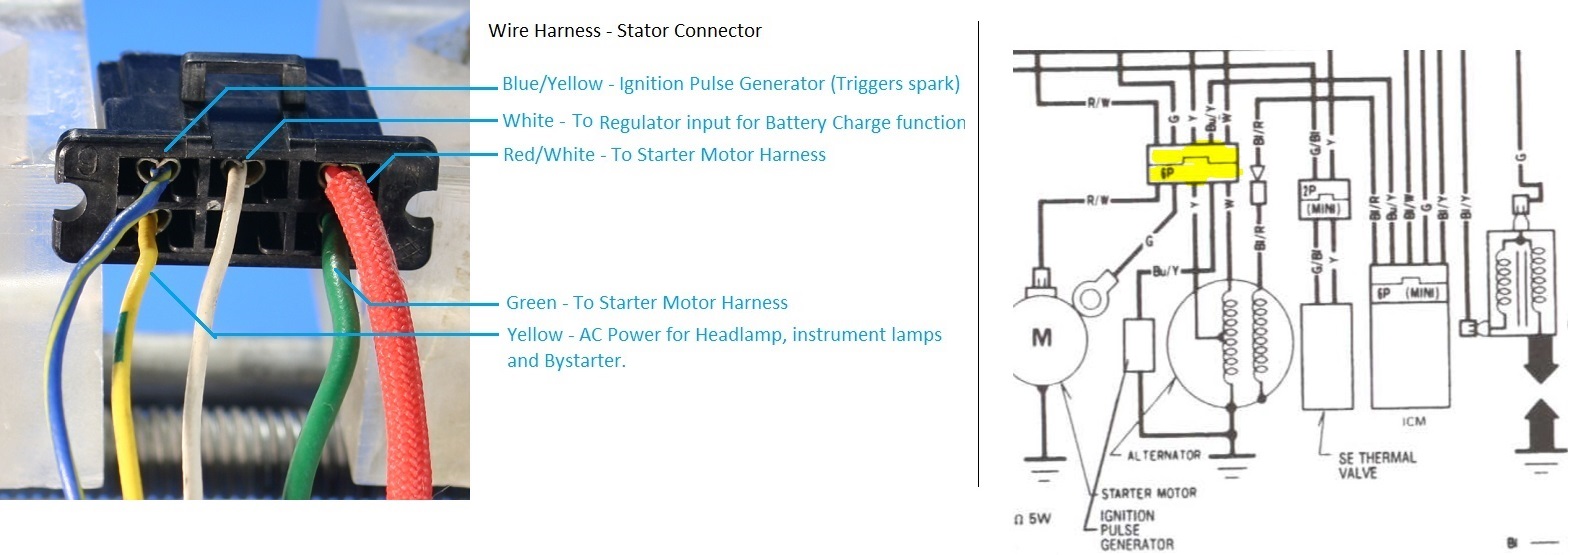 Stator_Connector_labeled.jpg